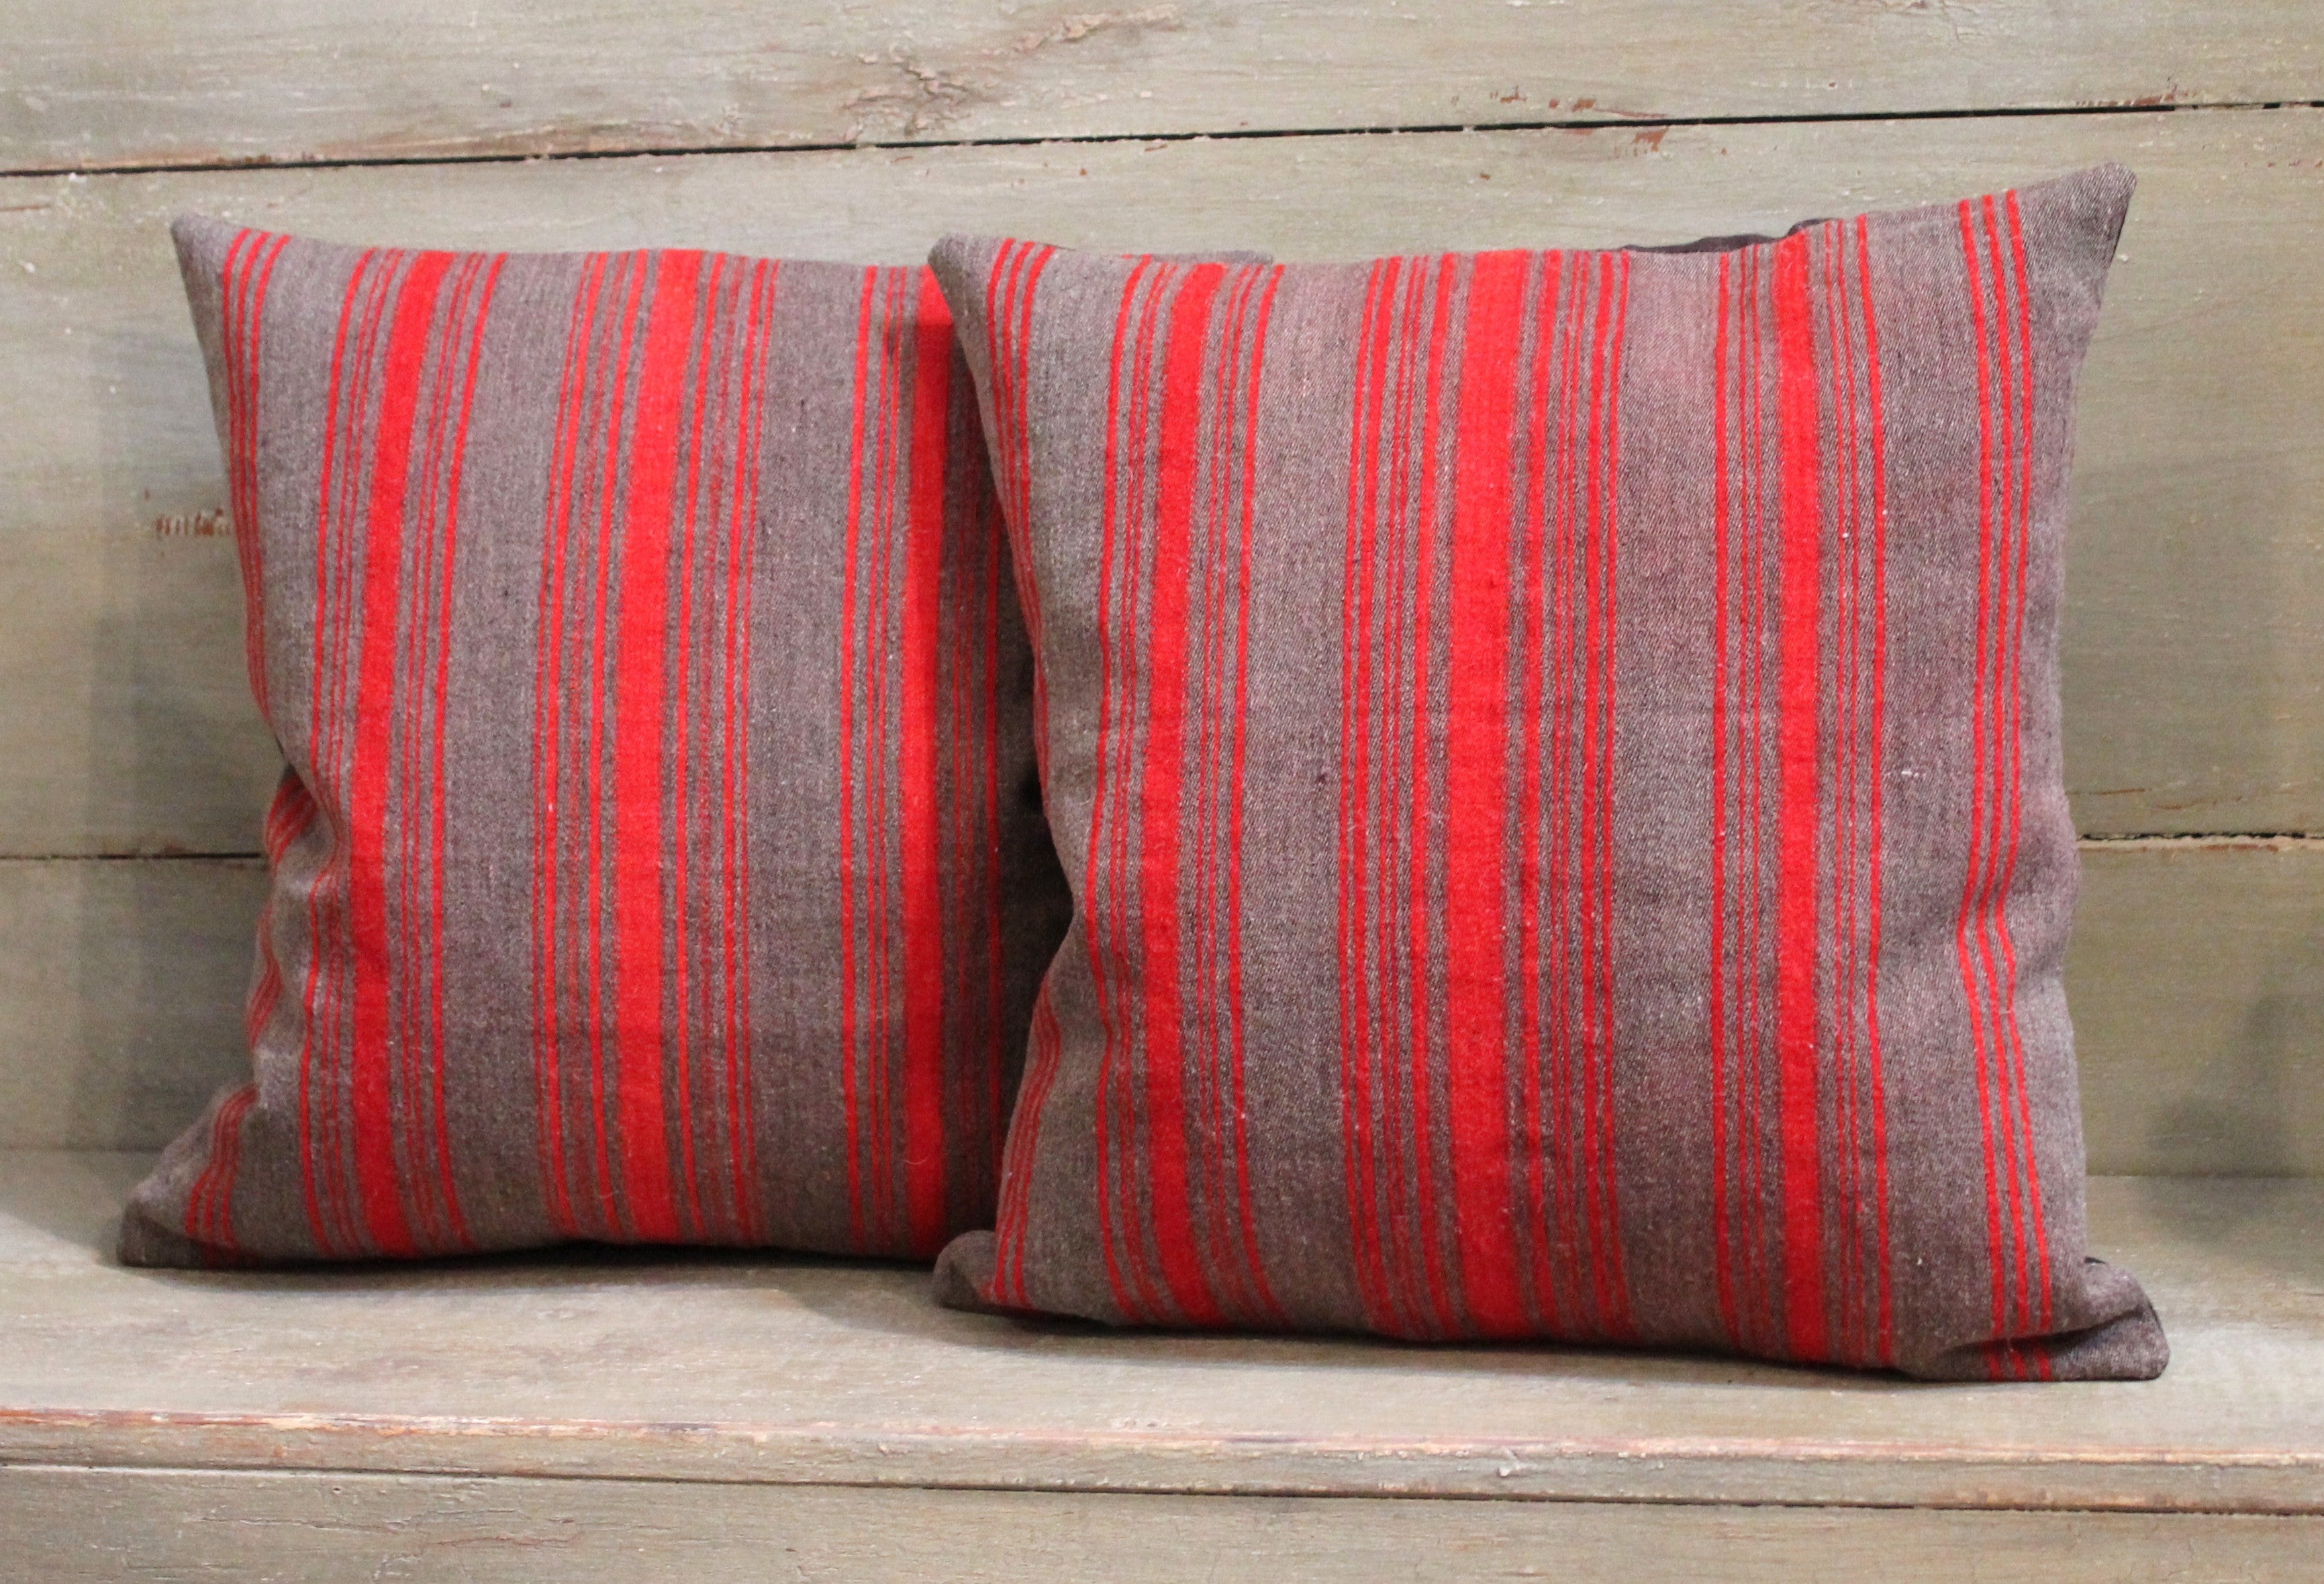 Pair of Late 19th Century Brown and Red Striped Pillows